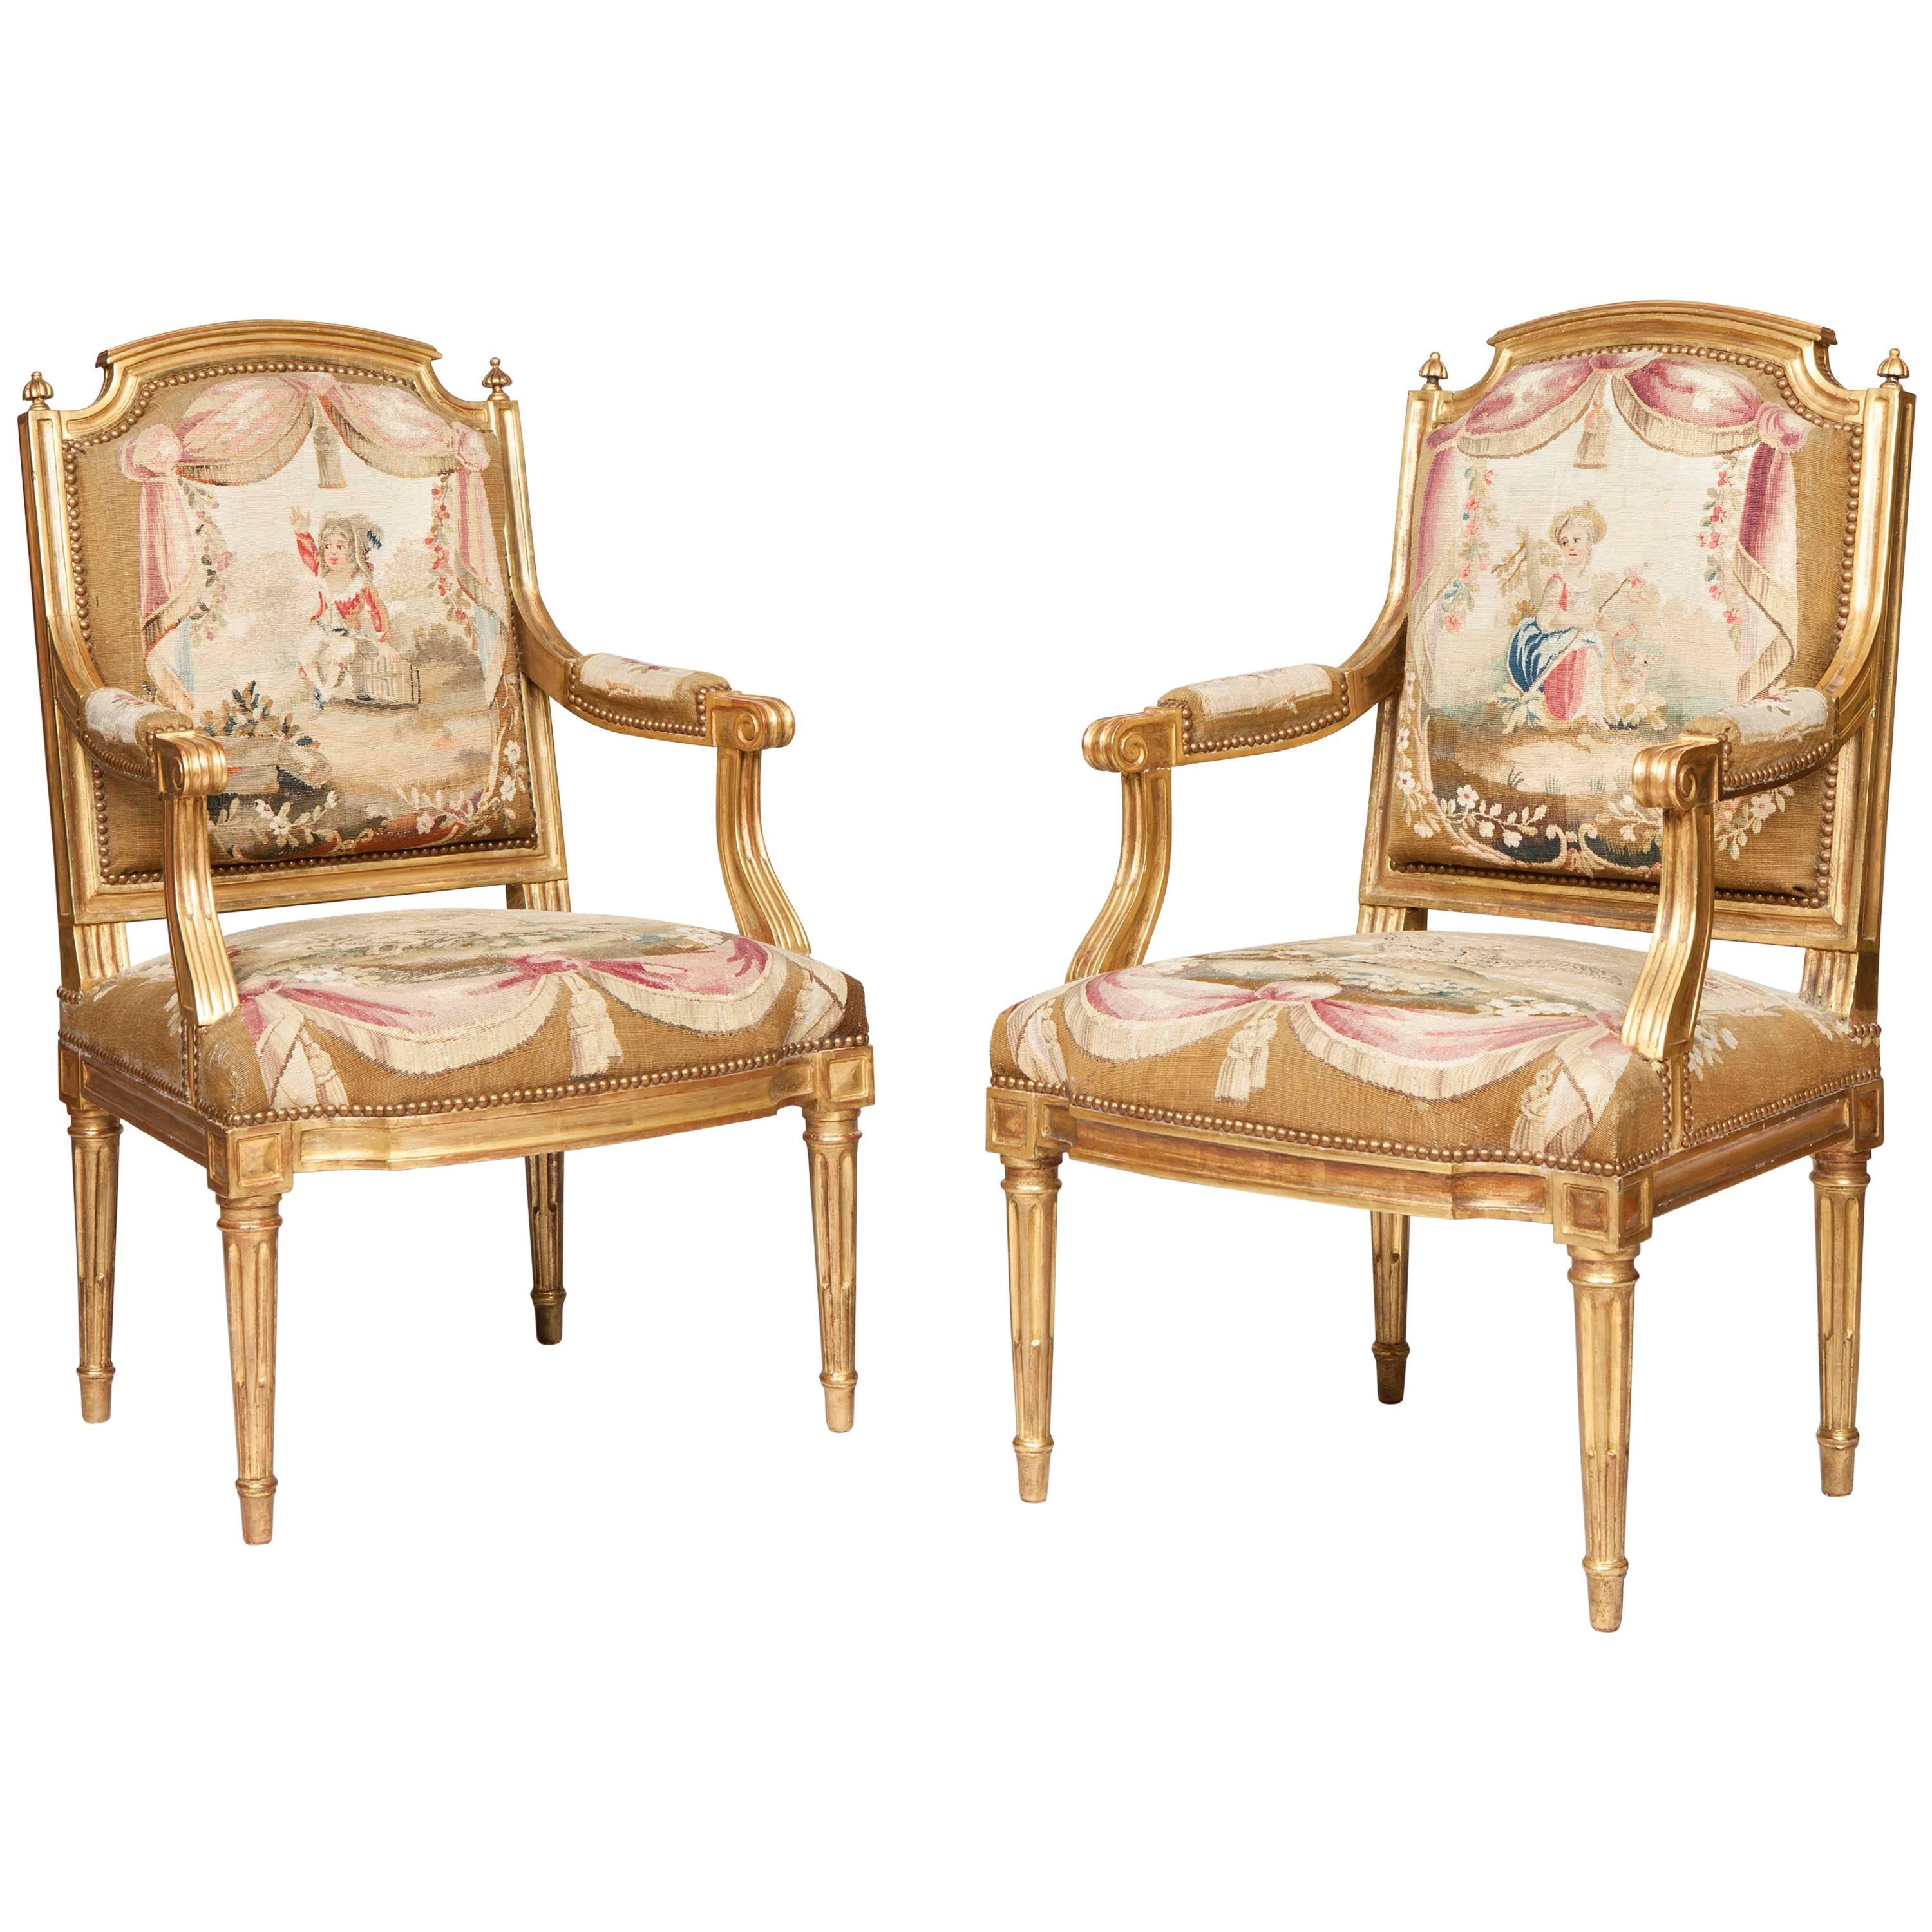 Pair of Louis XVI Period Giltwood and Tapestry Armchairs